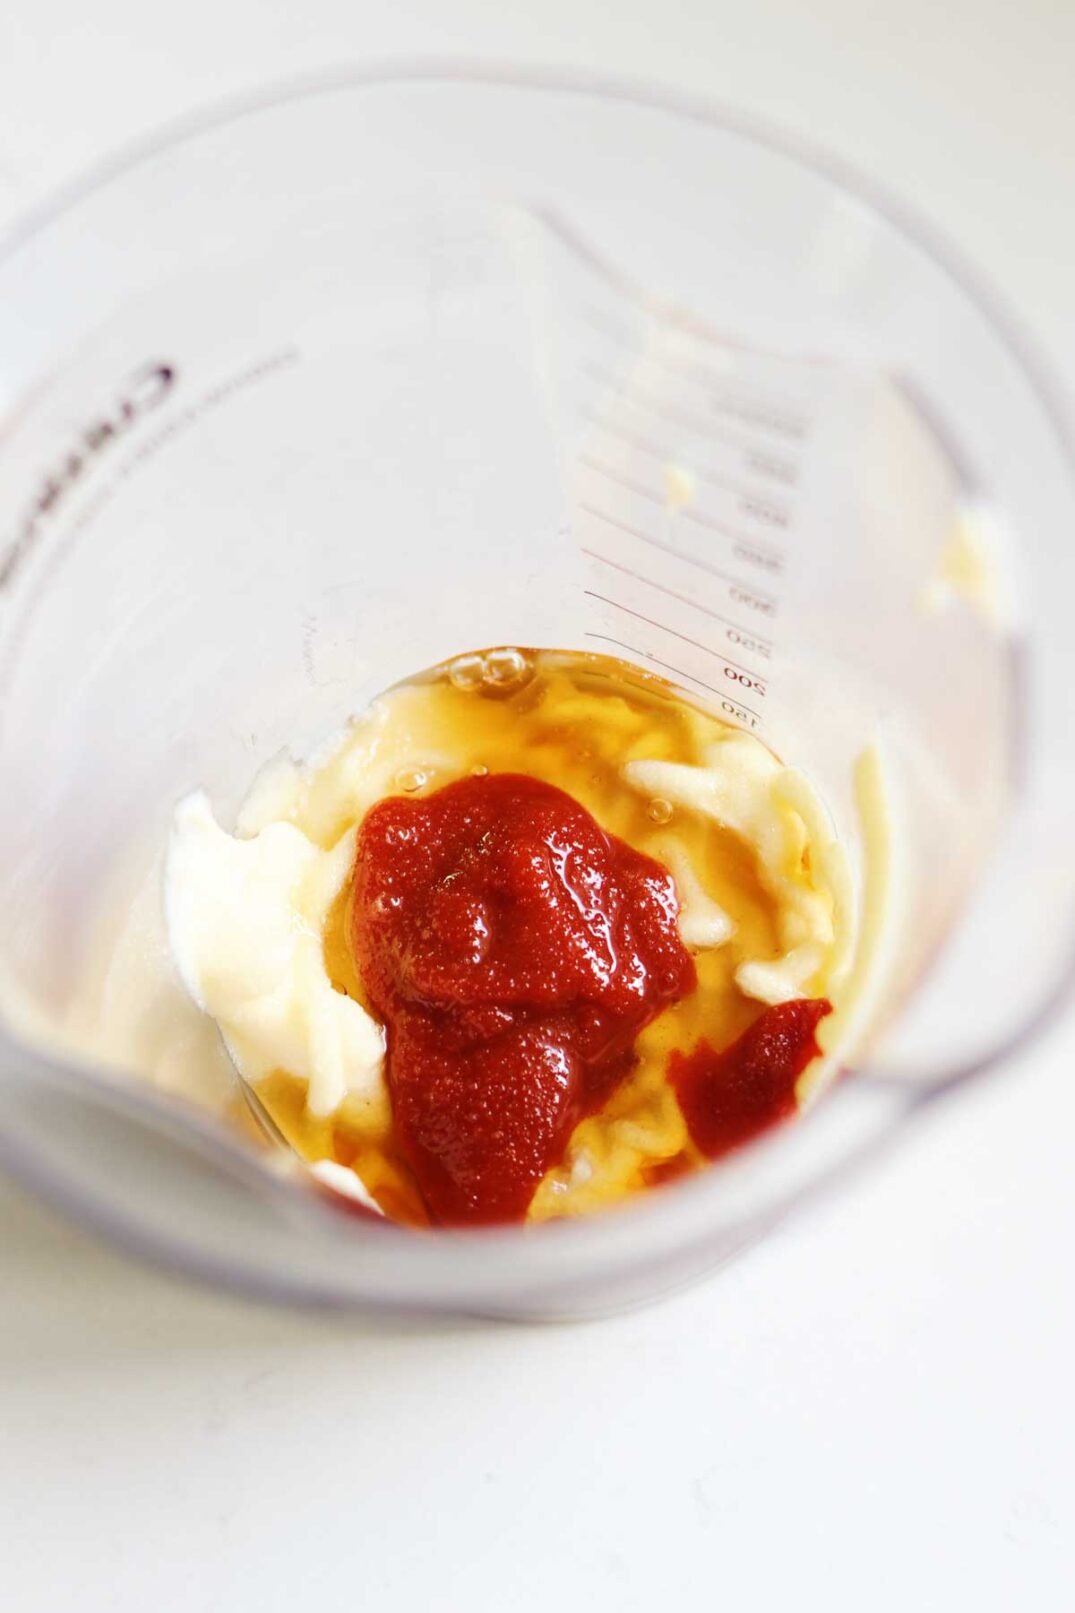 gochujang mayo ingredients in a class measuring cup